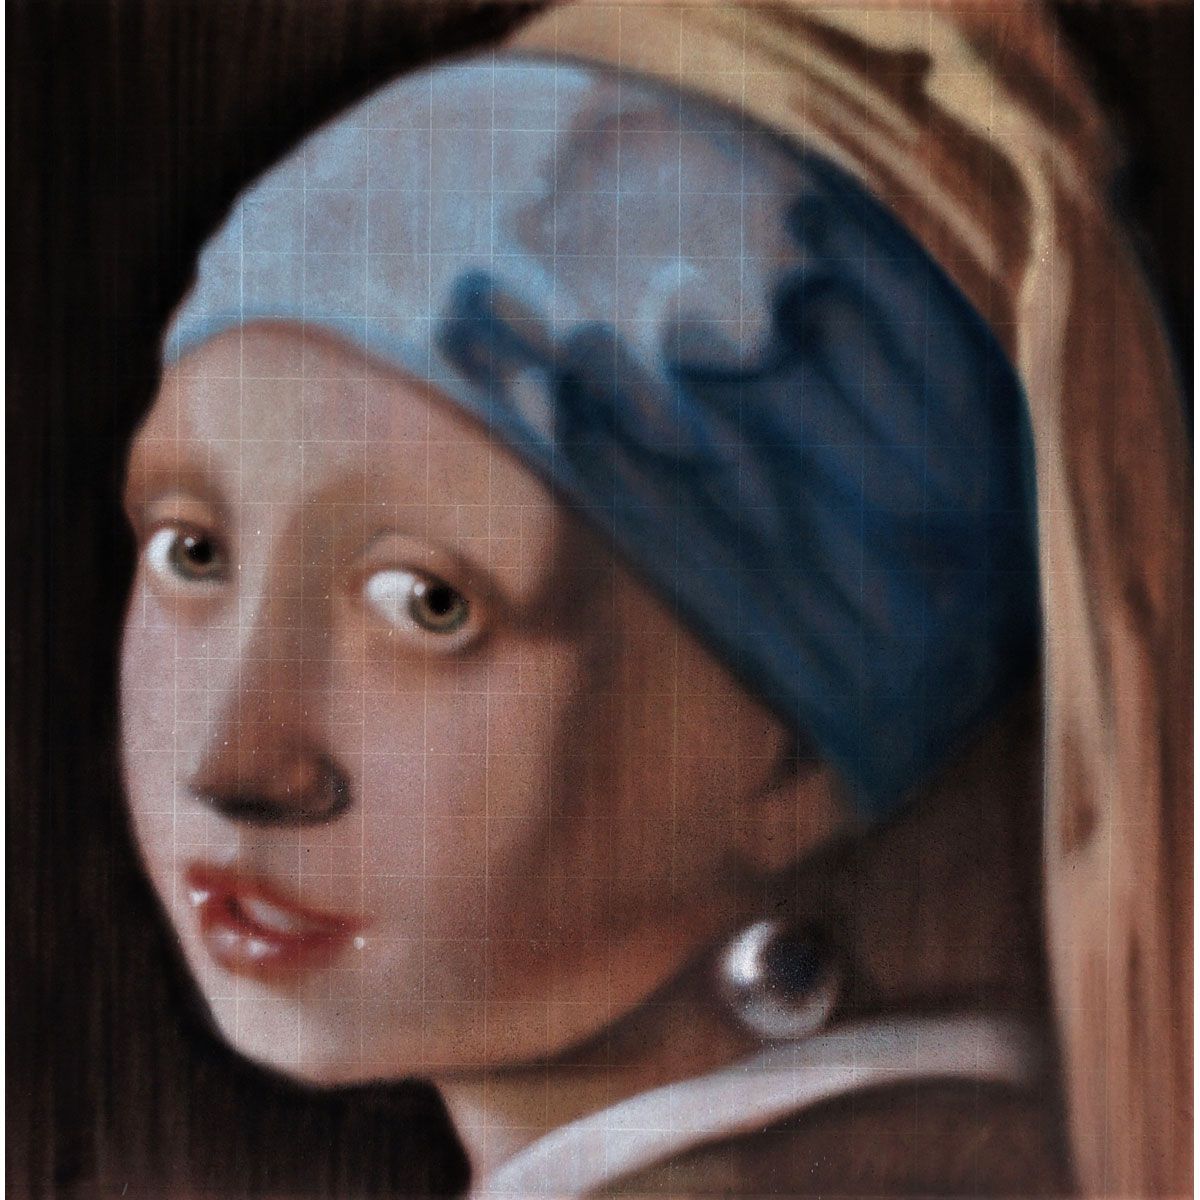 Null Andrea RAVO MATTONI, Italian, born in 1981

After Vermeer's Girl with a Pea&hellip;